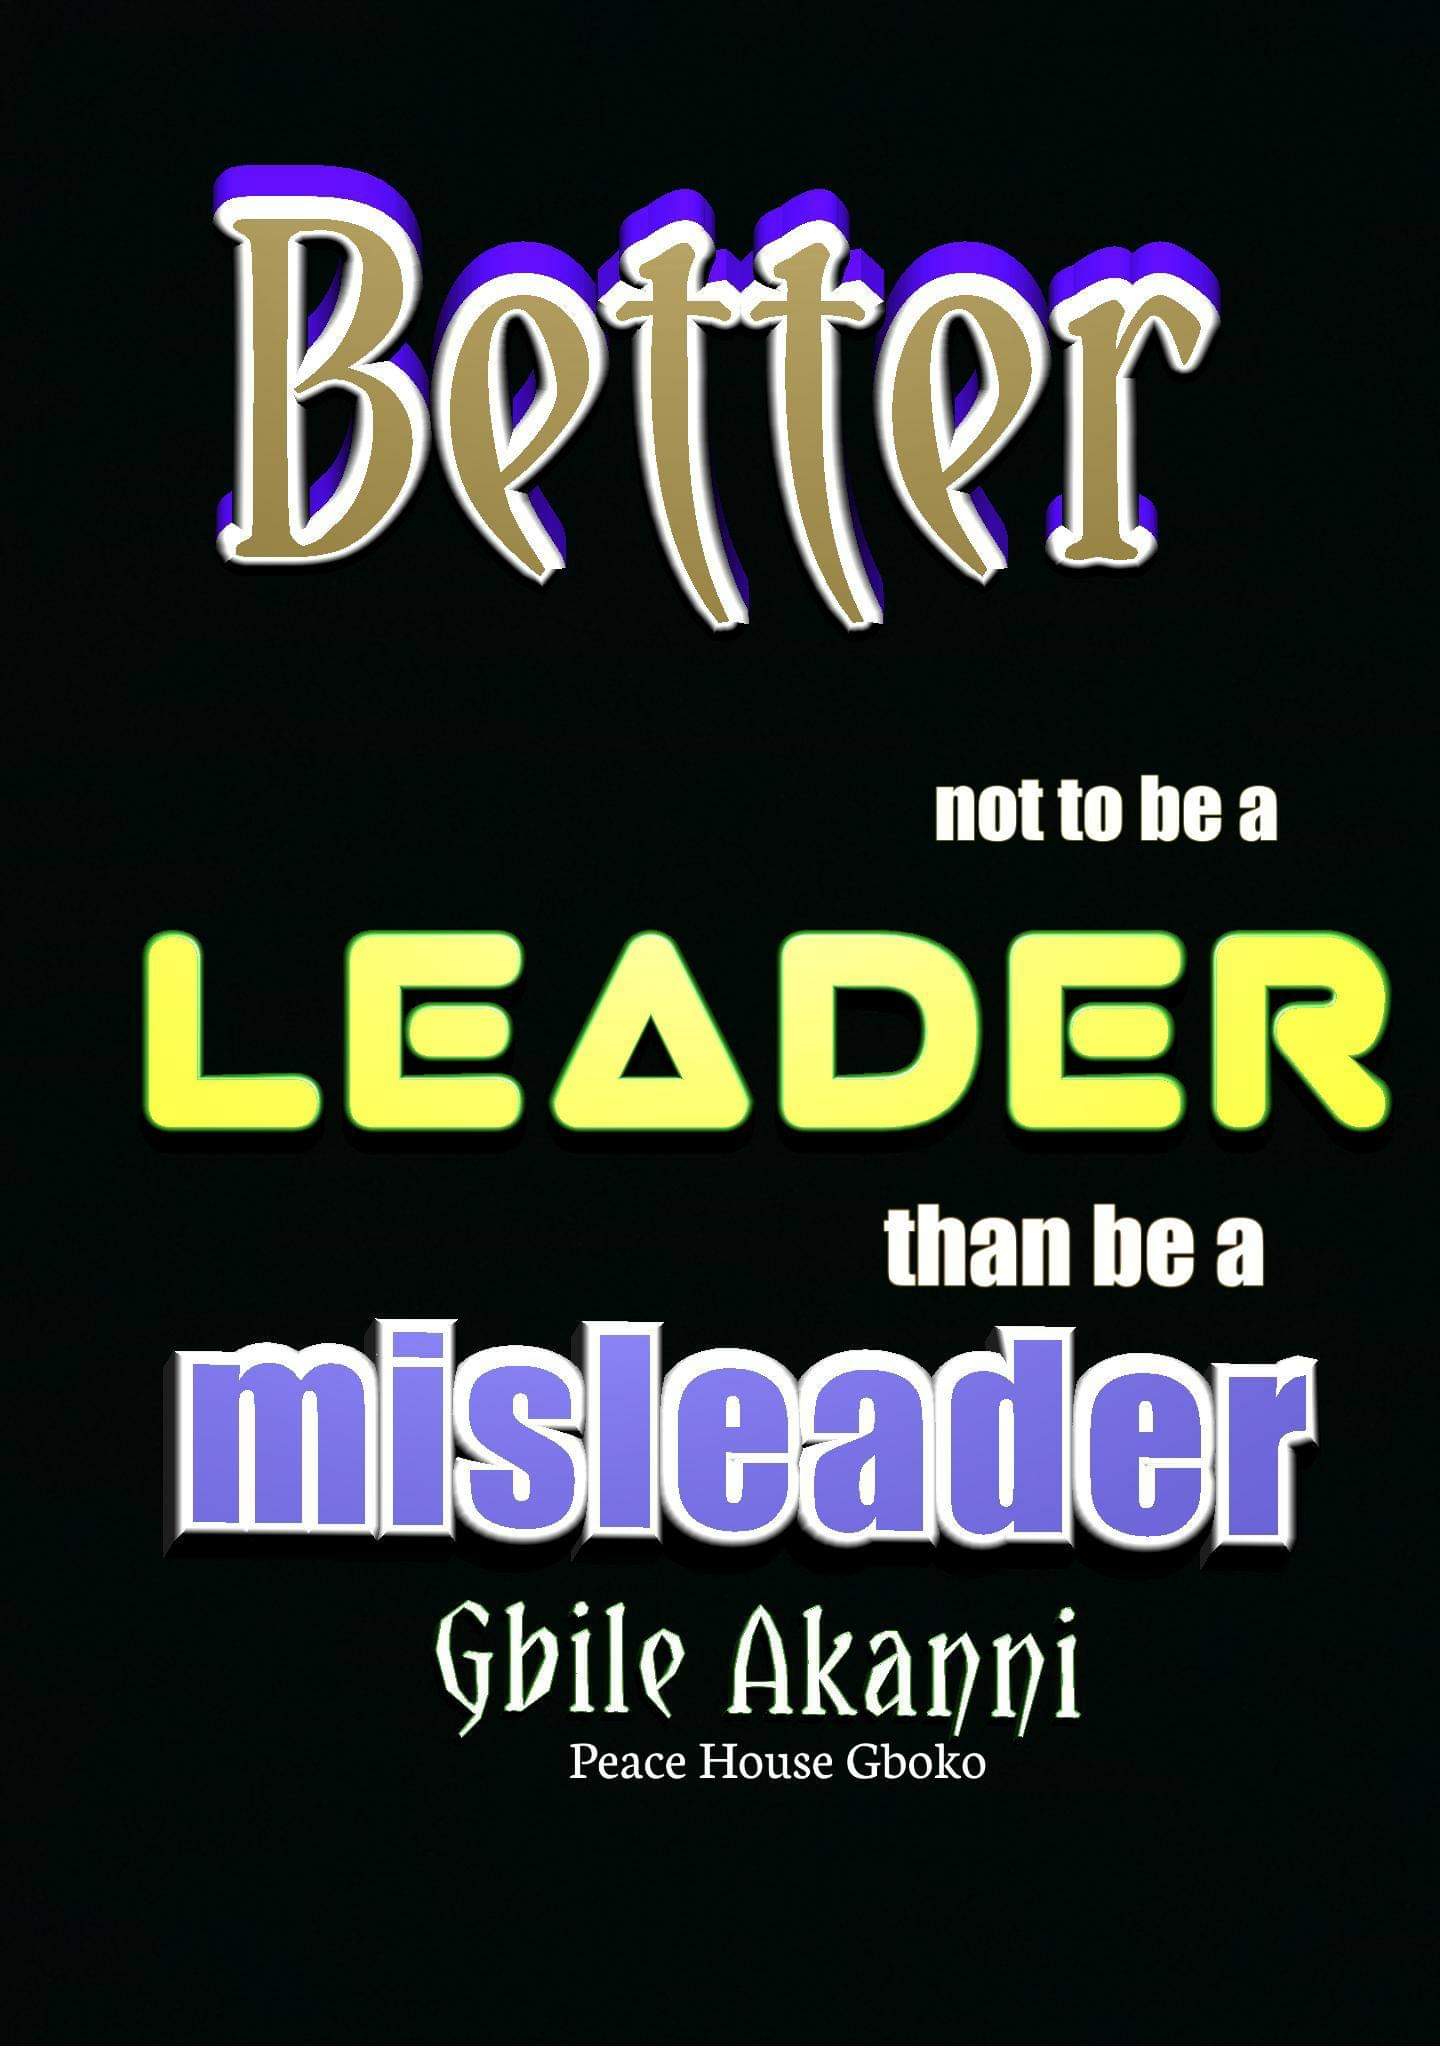 Gbile Akanni quotes